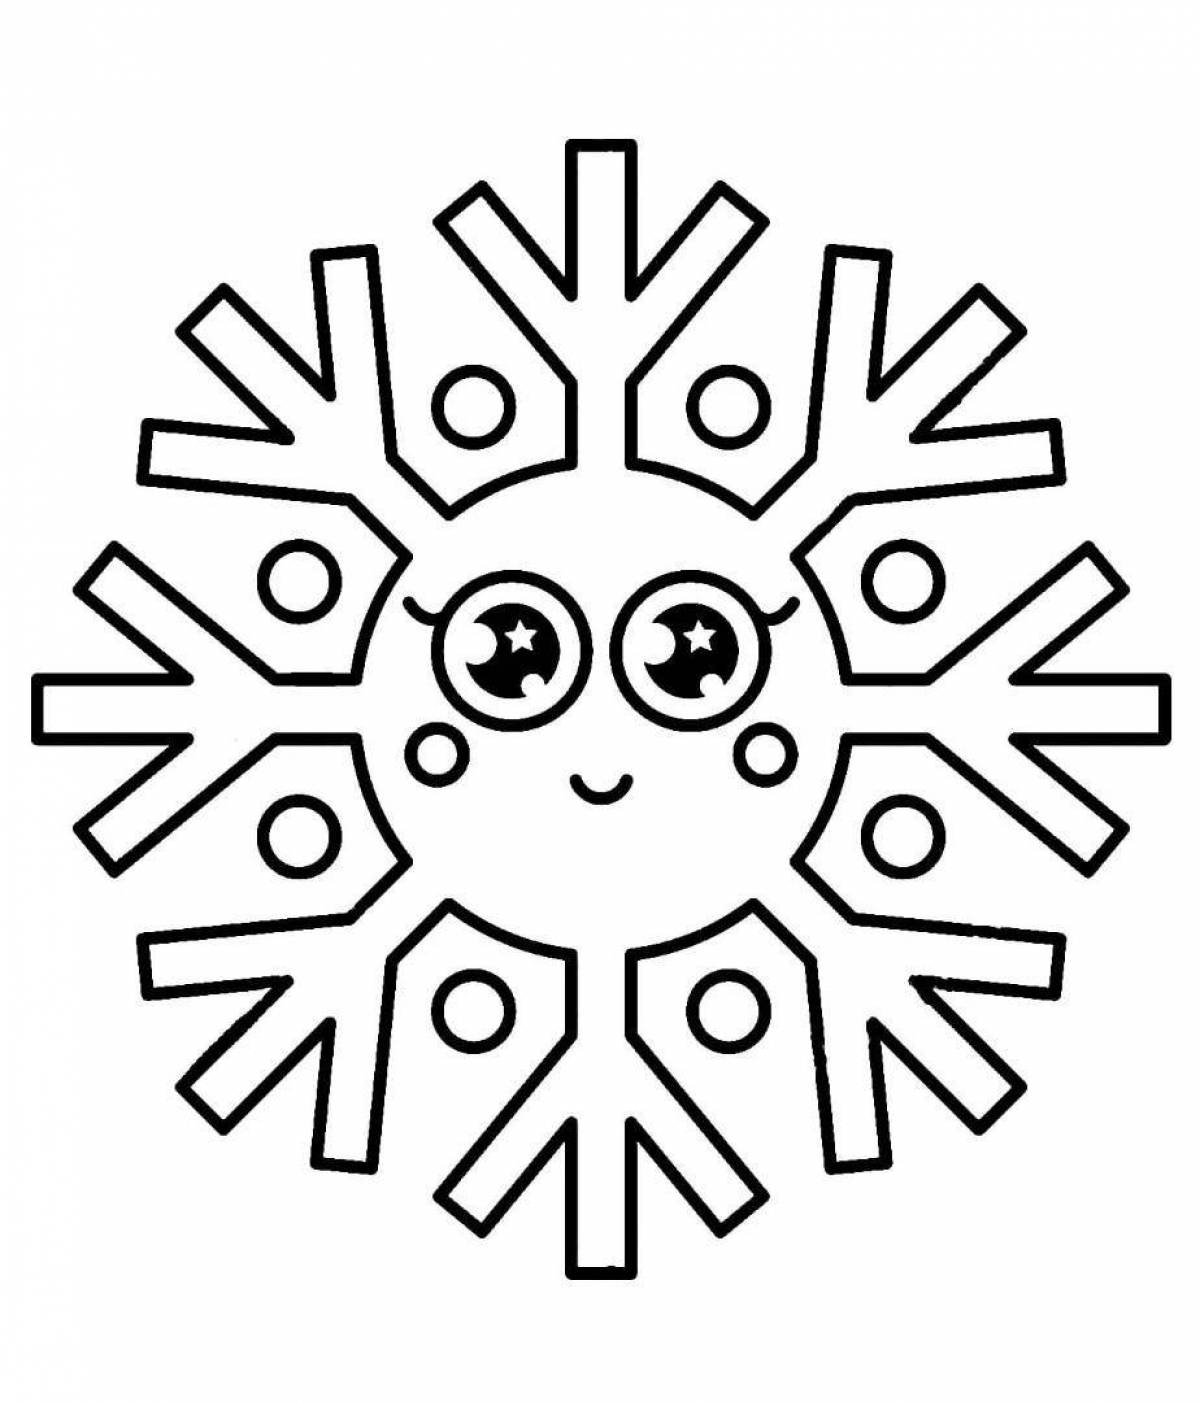 Dazzling snowflake coloring pages